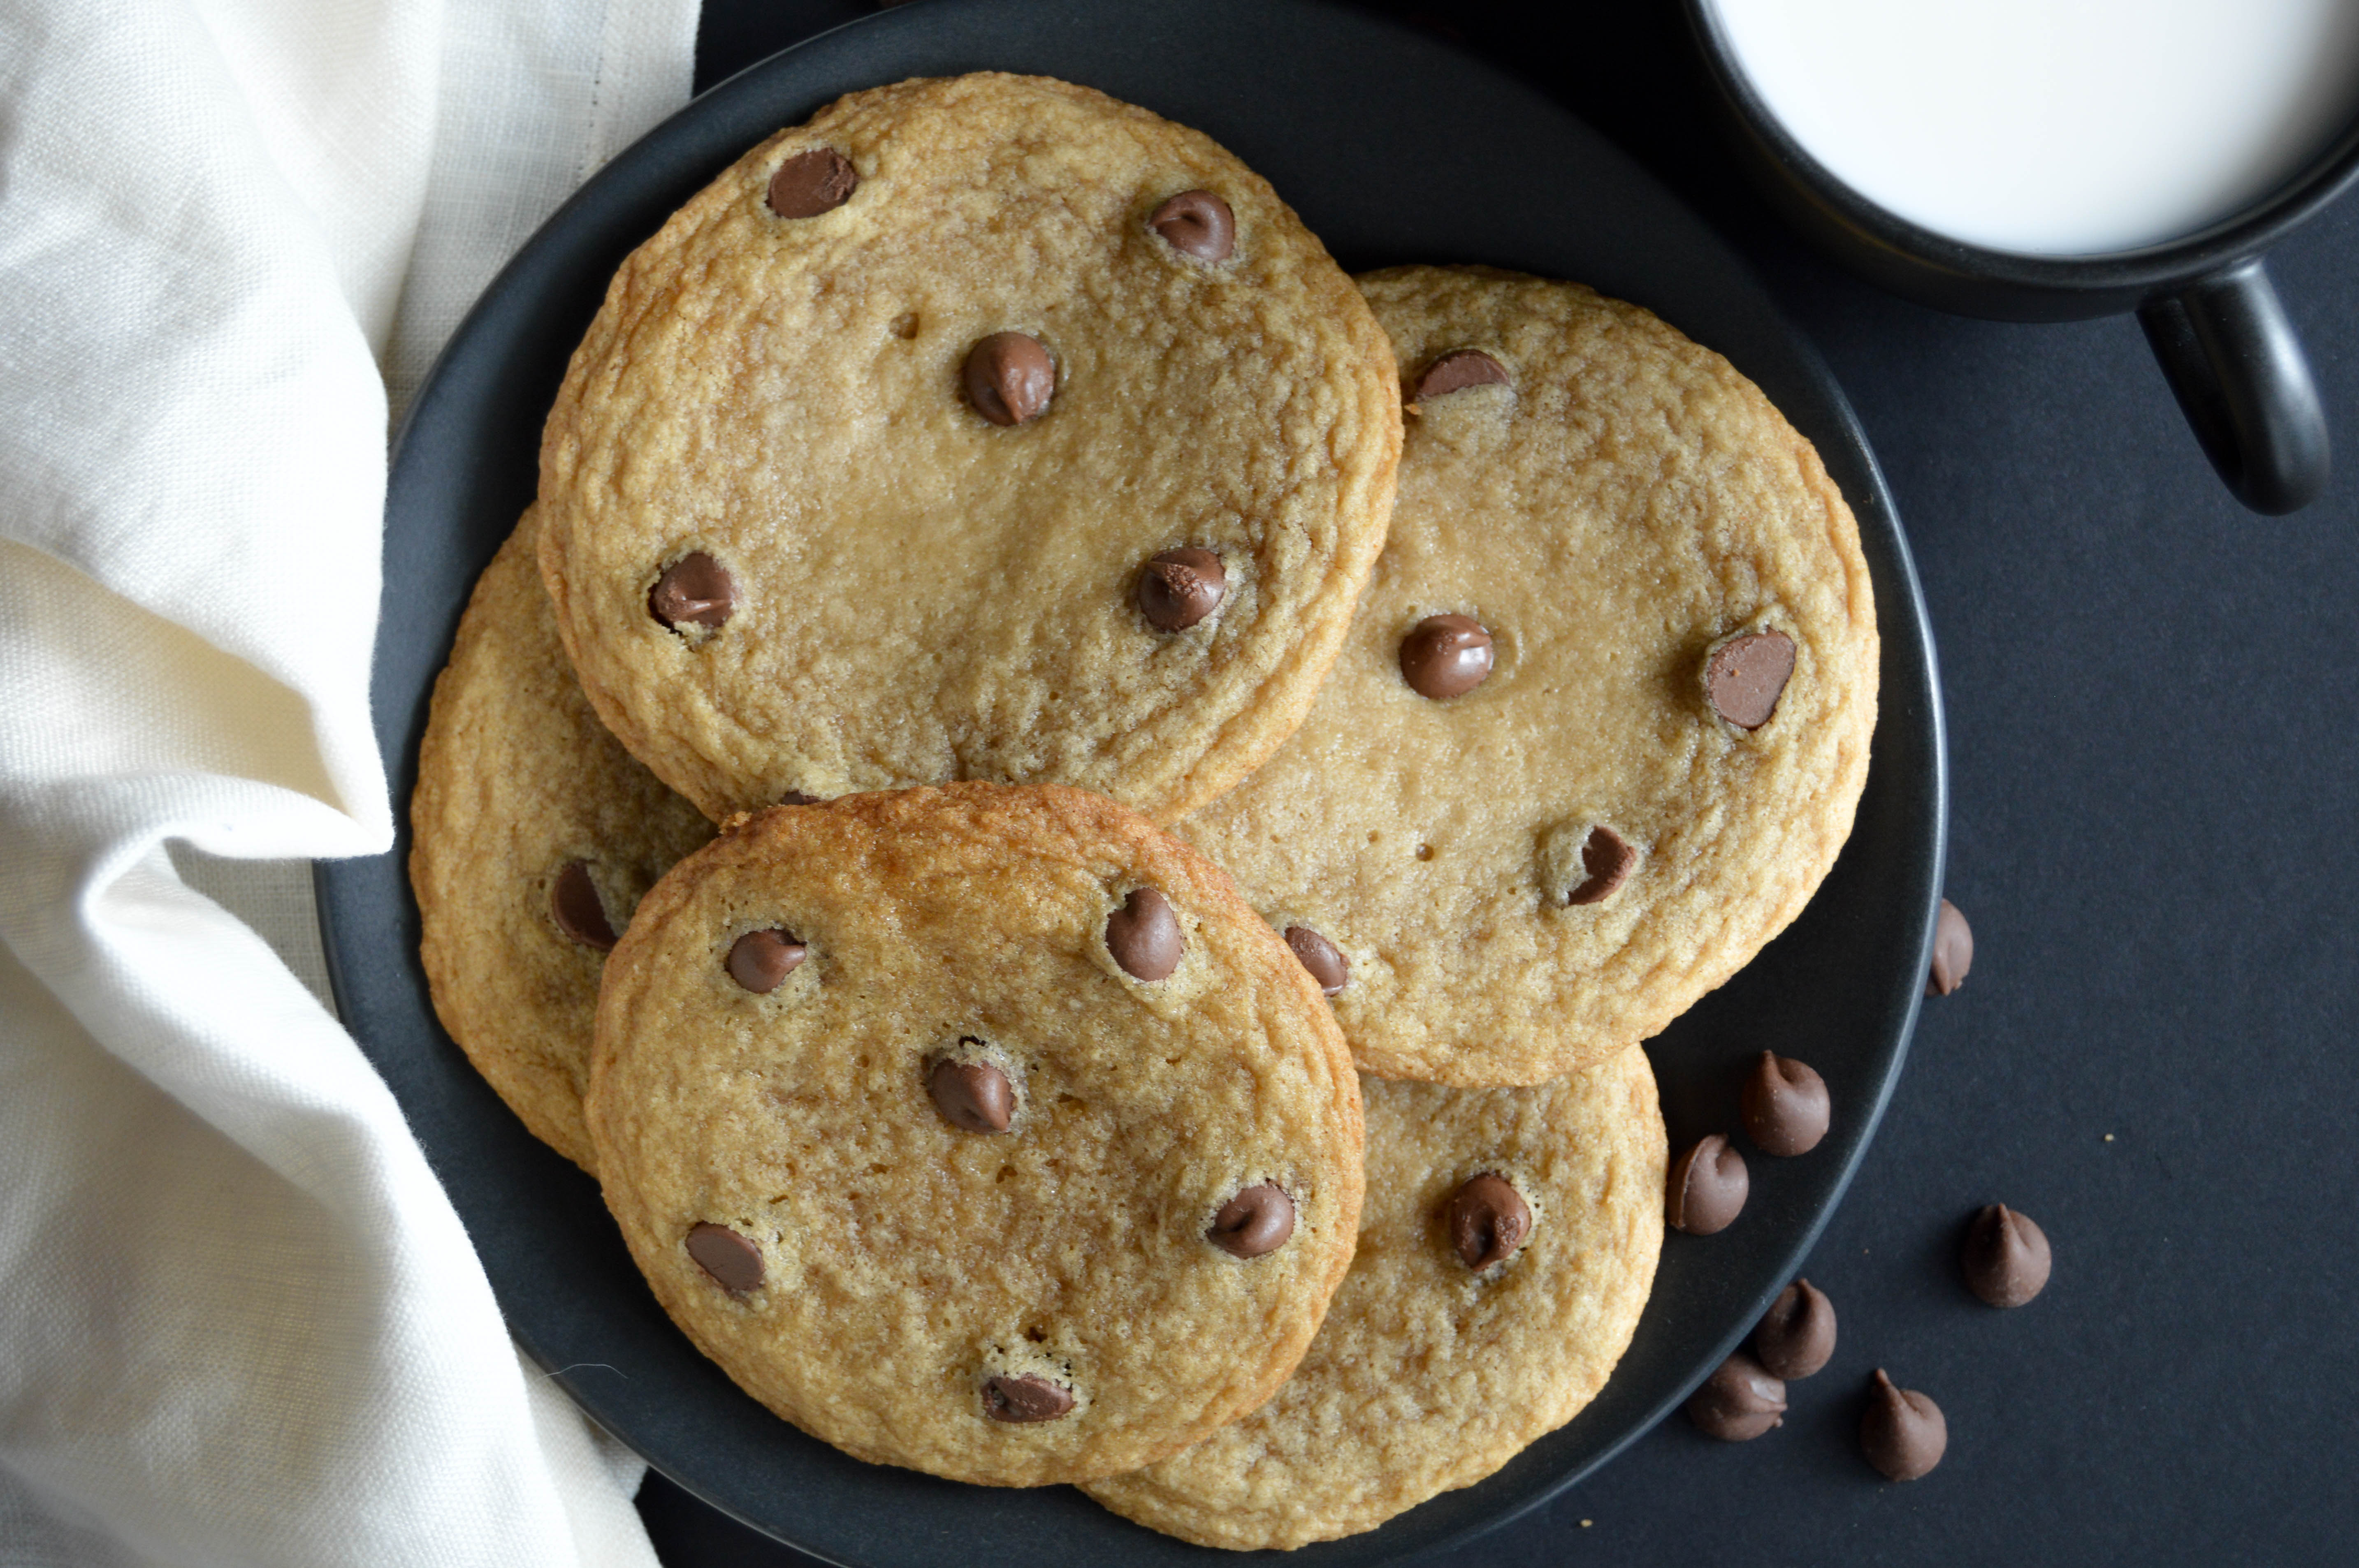 Grandma Jan's recipe. Here are her ingredients and directions for soft, chewy, and gooey milk chocolate chip cookies and butterscotch chip cookies. 